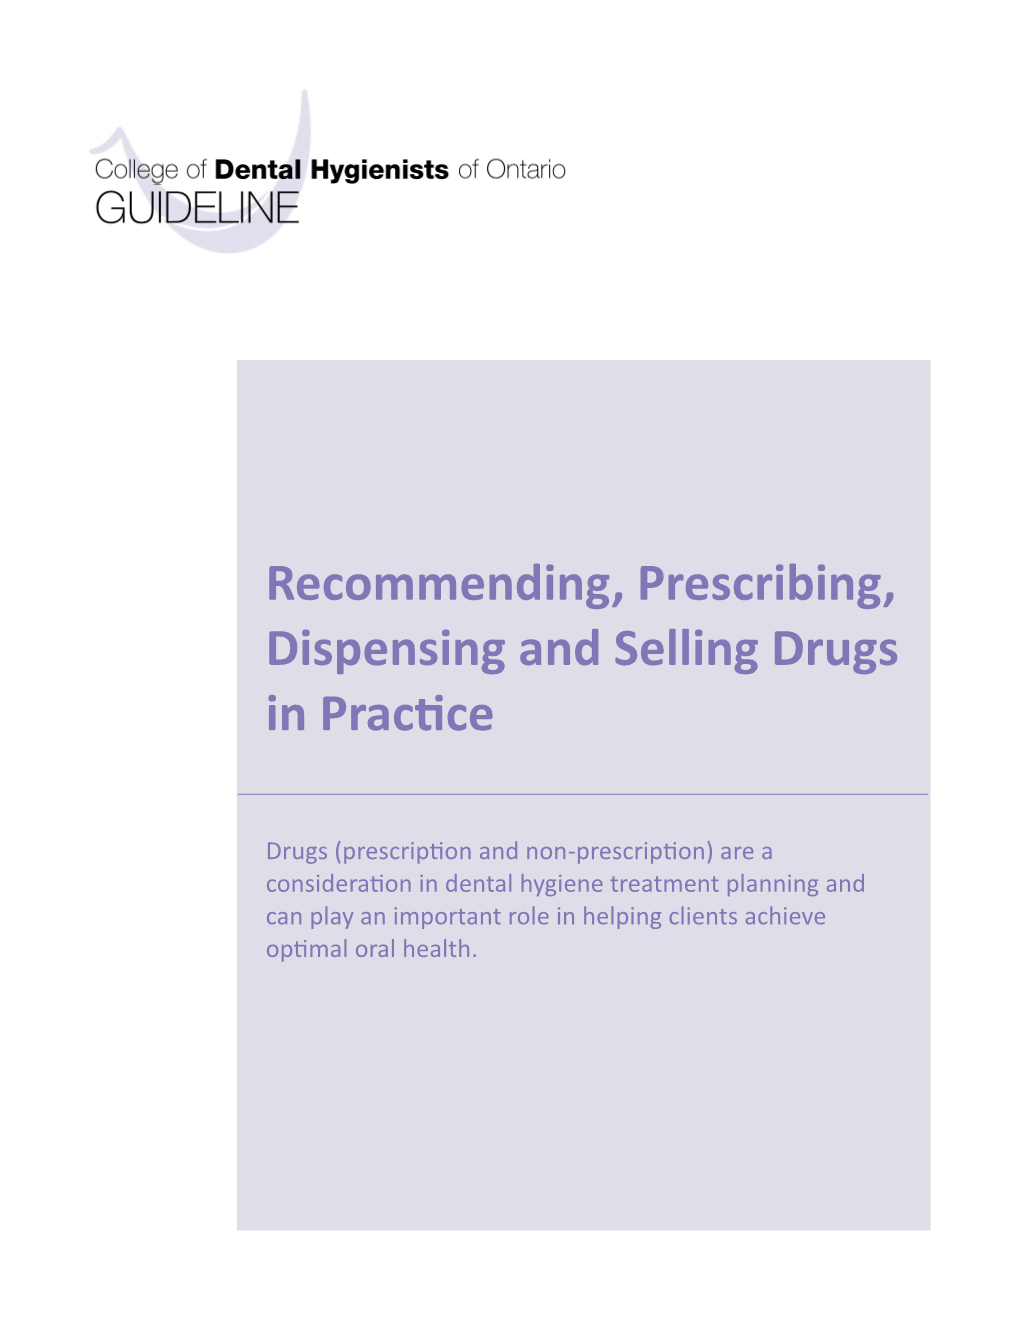 Recommending, Prescribing, Dispensing and Selling Drugs in Practice